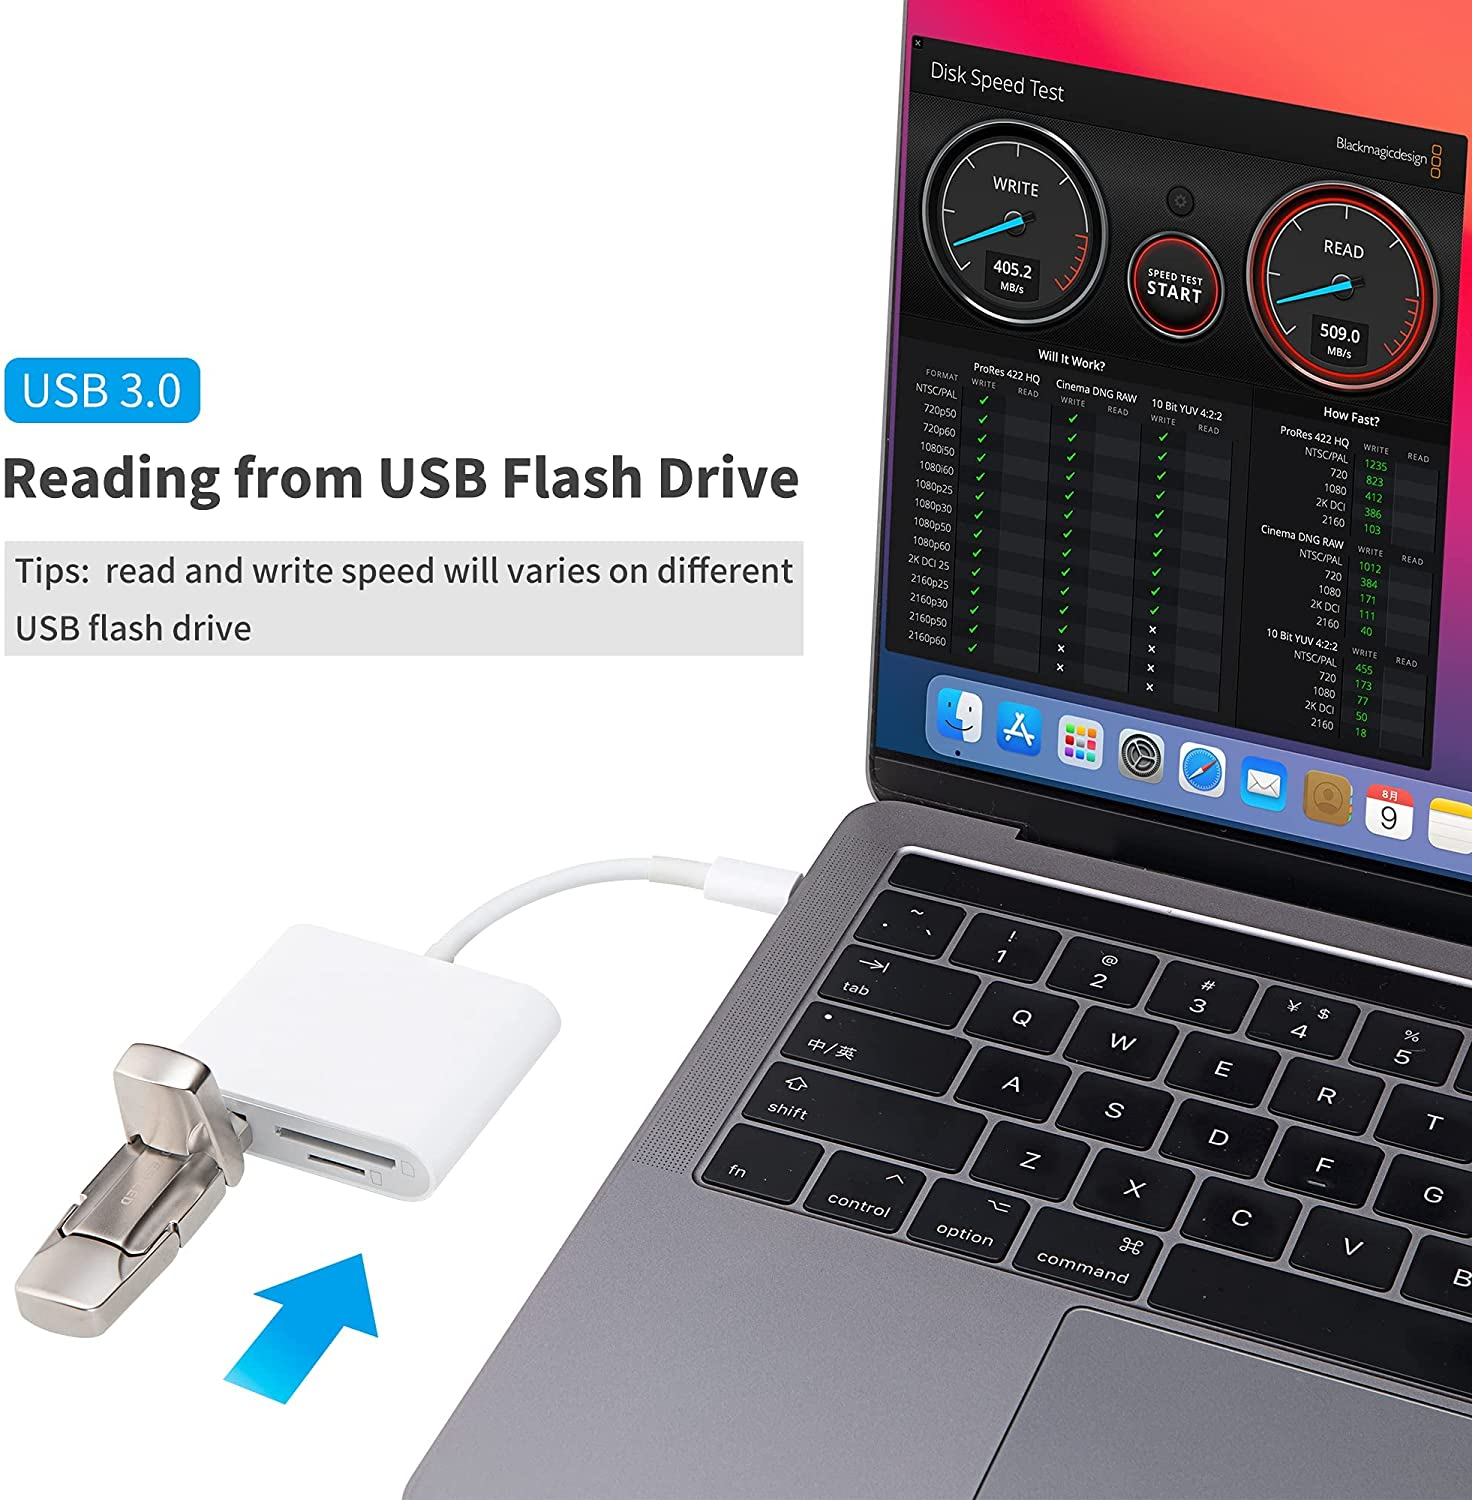 USB C to SD Card Reader with USB 3.0 Thunderbolt to Micro SD TF Card Reader 3 in 1 USB-C to USB Camera Memory Card Reader Adapter for Ipad Pro Macbook Pro/Air Imac M1 XPS13/15 RRSITIAU (White)